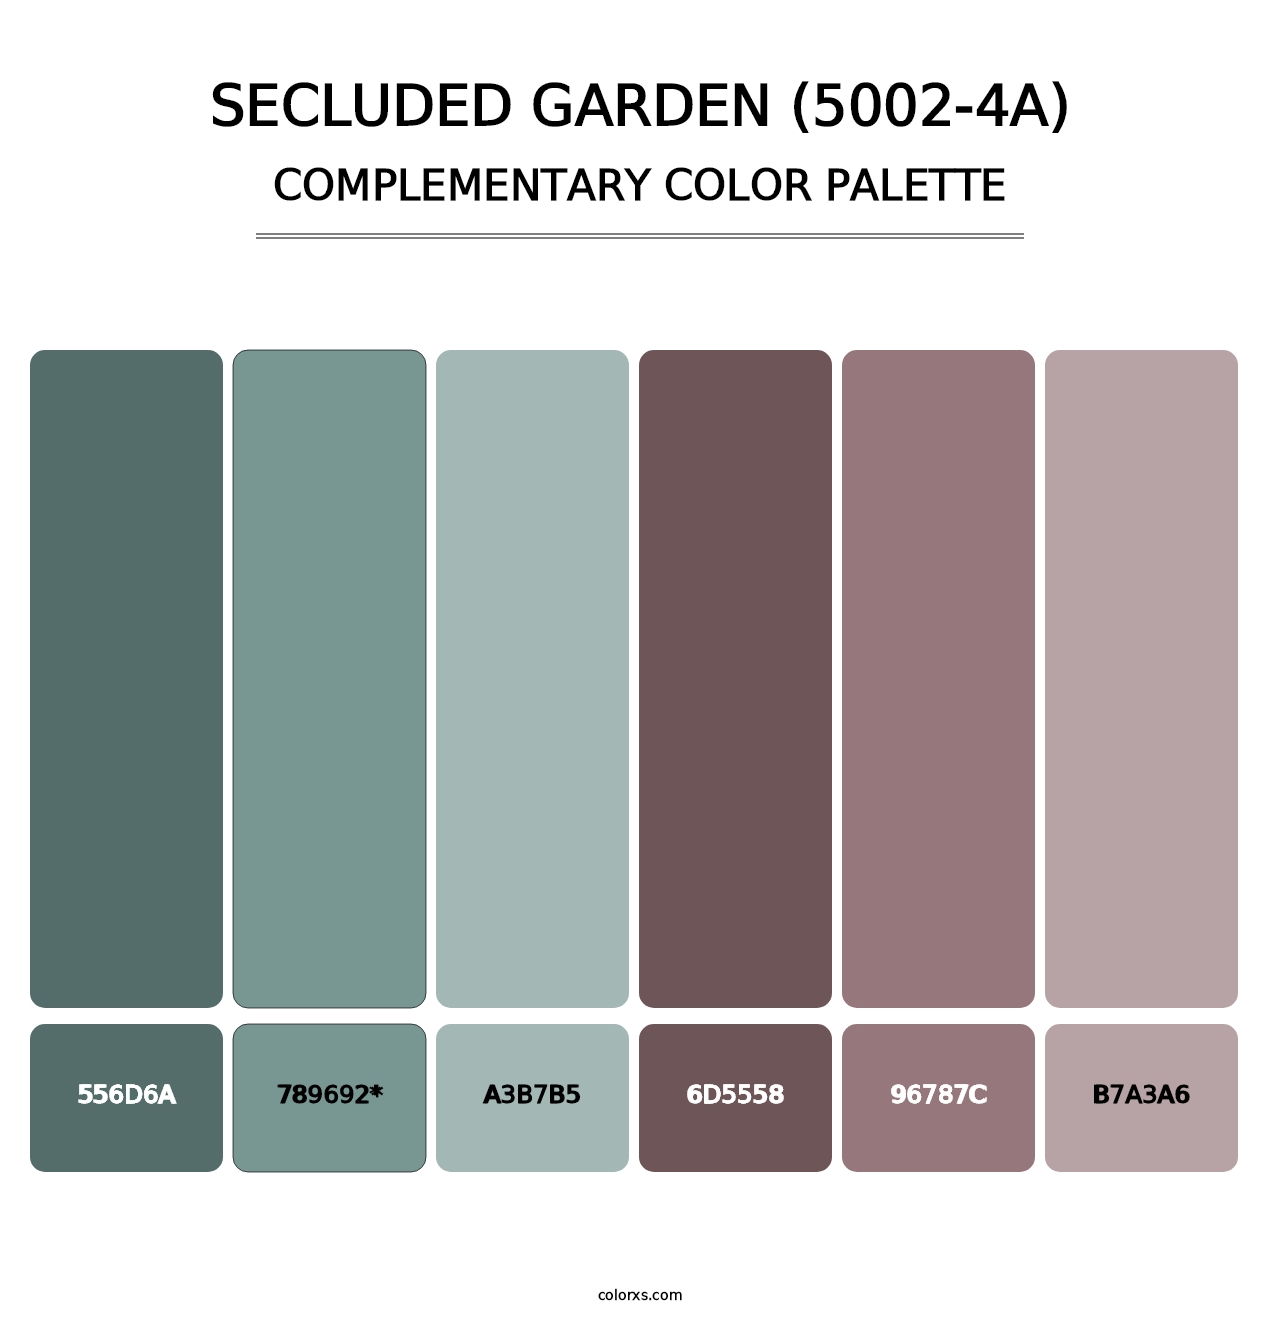 Secluded Garden (5002-4A) - Complementary Color Palette